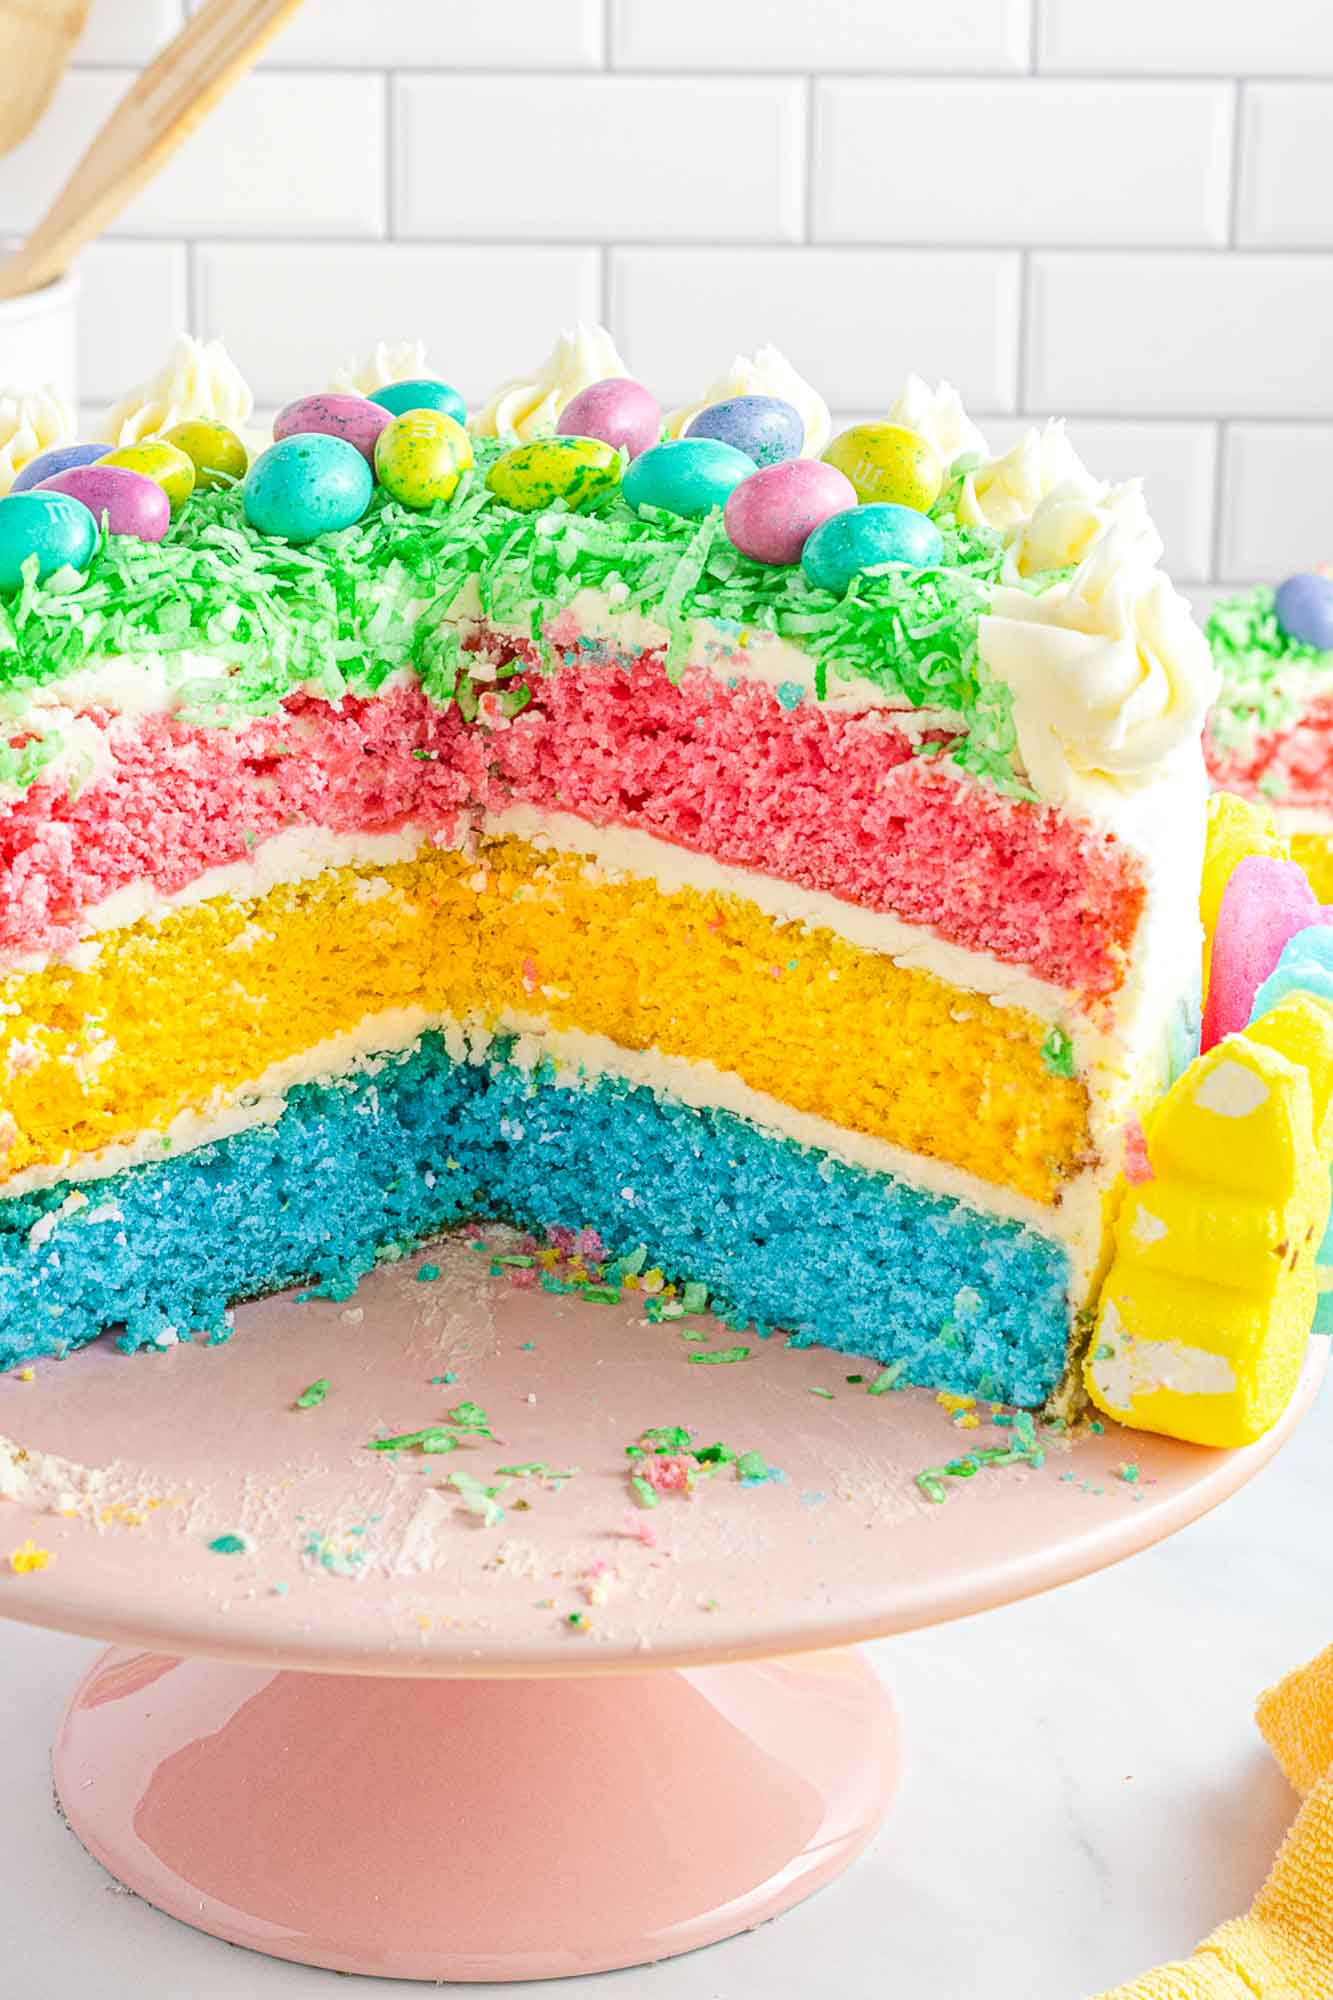 Easter layer cake with 3 different layers: pink, yellow, and blue. Shown on a pink cake stand.